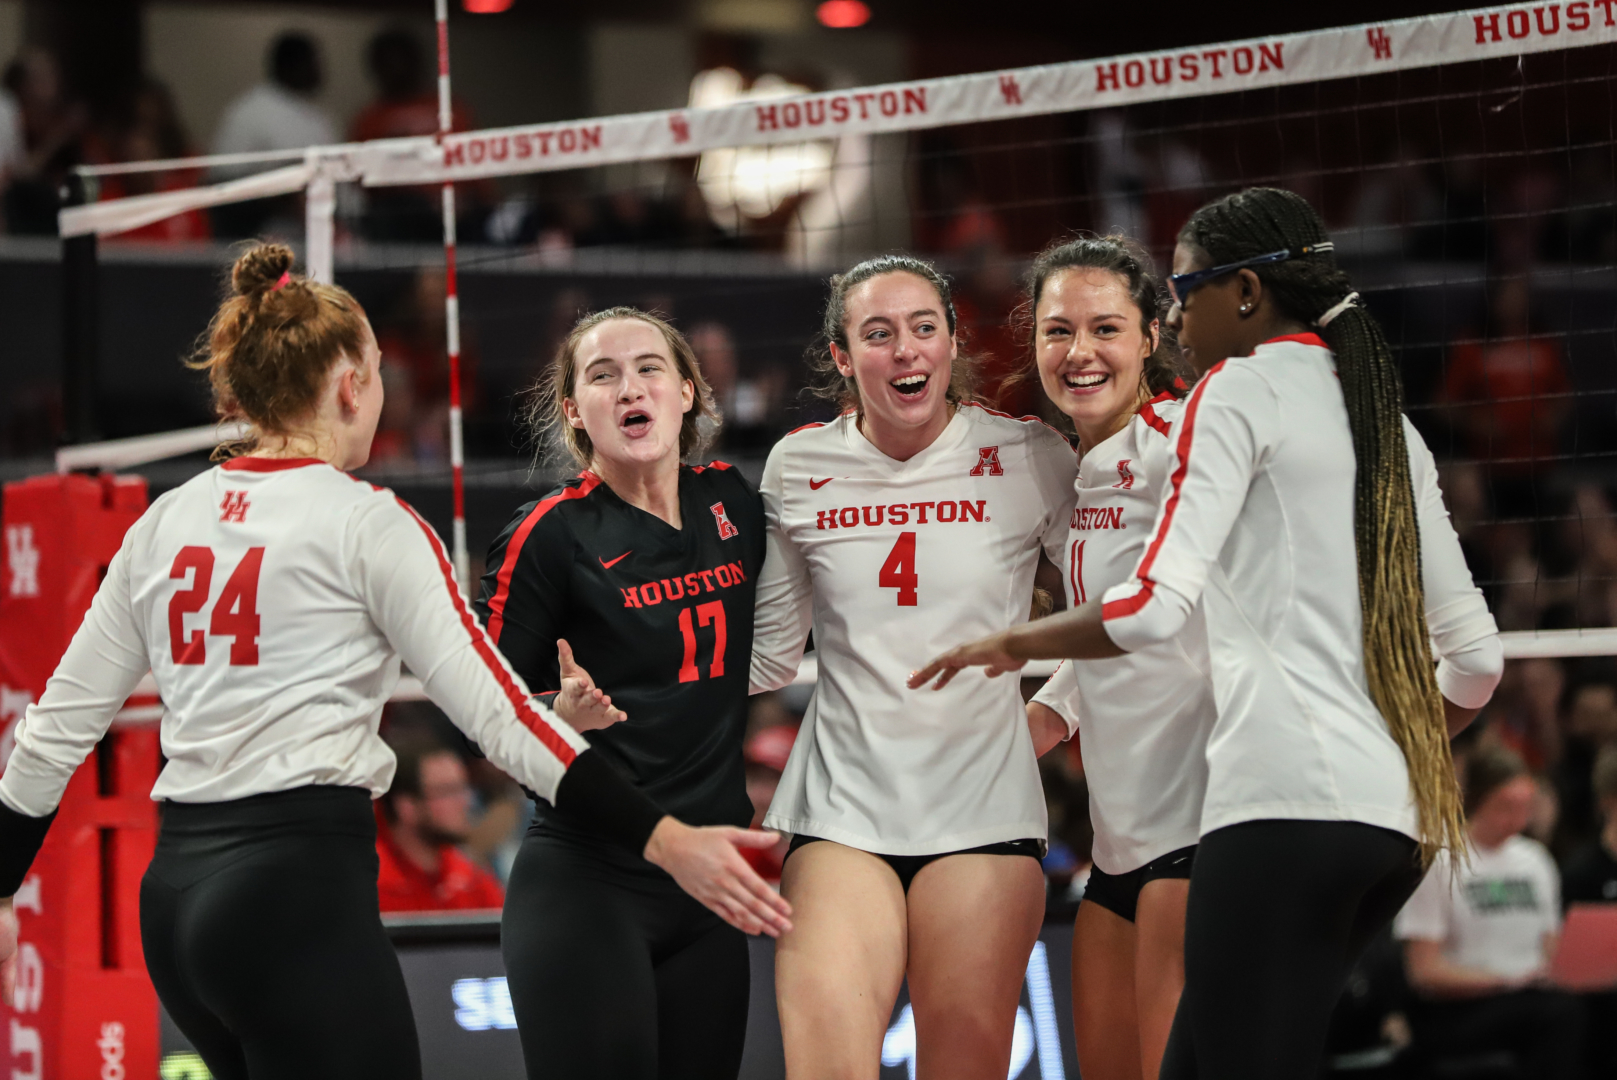 With 13 straight victories, UH volleyball is riding the third-longest winning streak in program history. | Sean Thomas/The Cougar